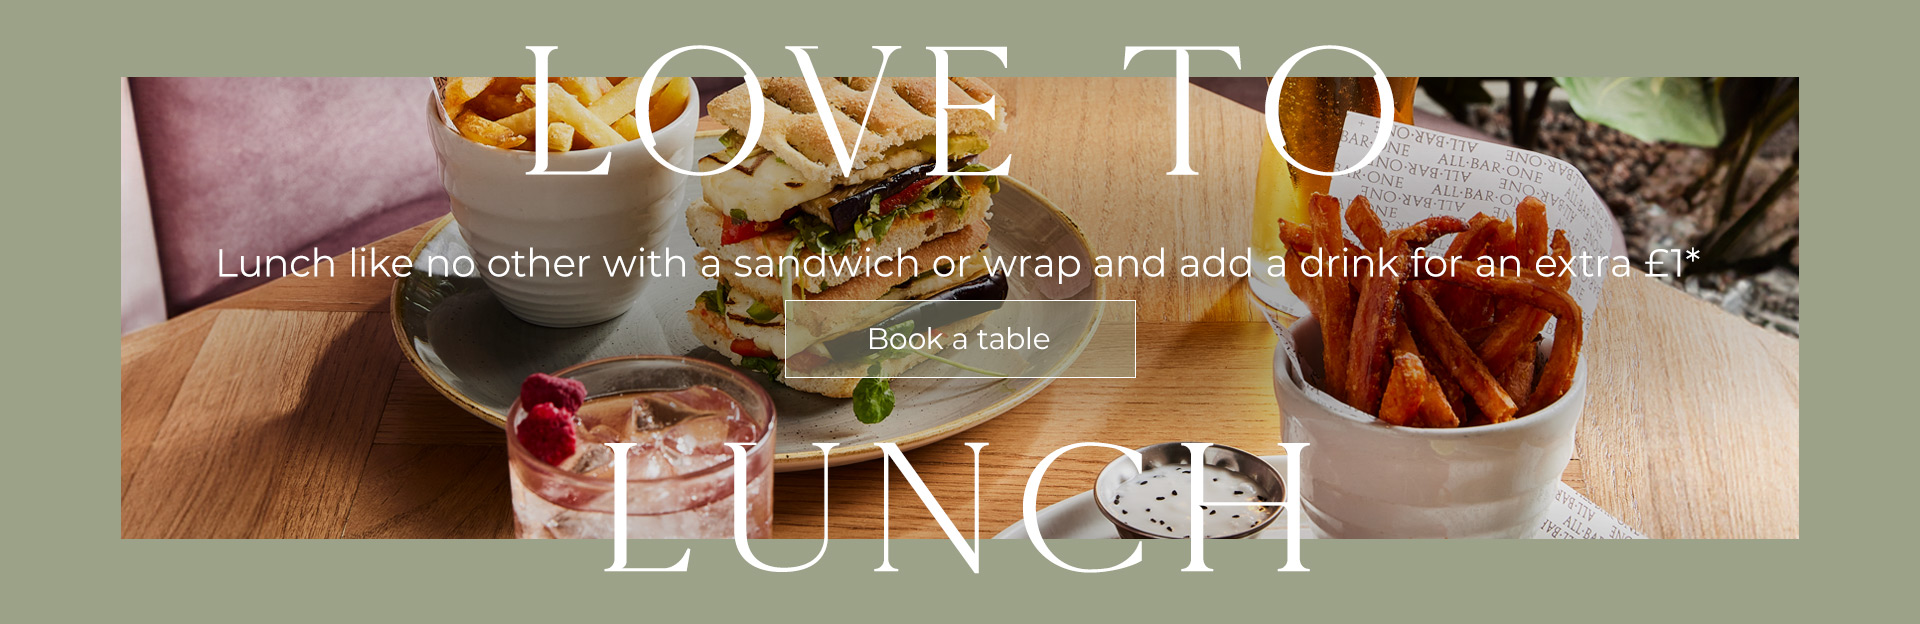 Lunch Offer at All Bar One Brindleyplace